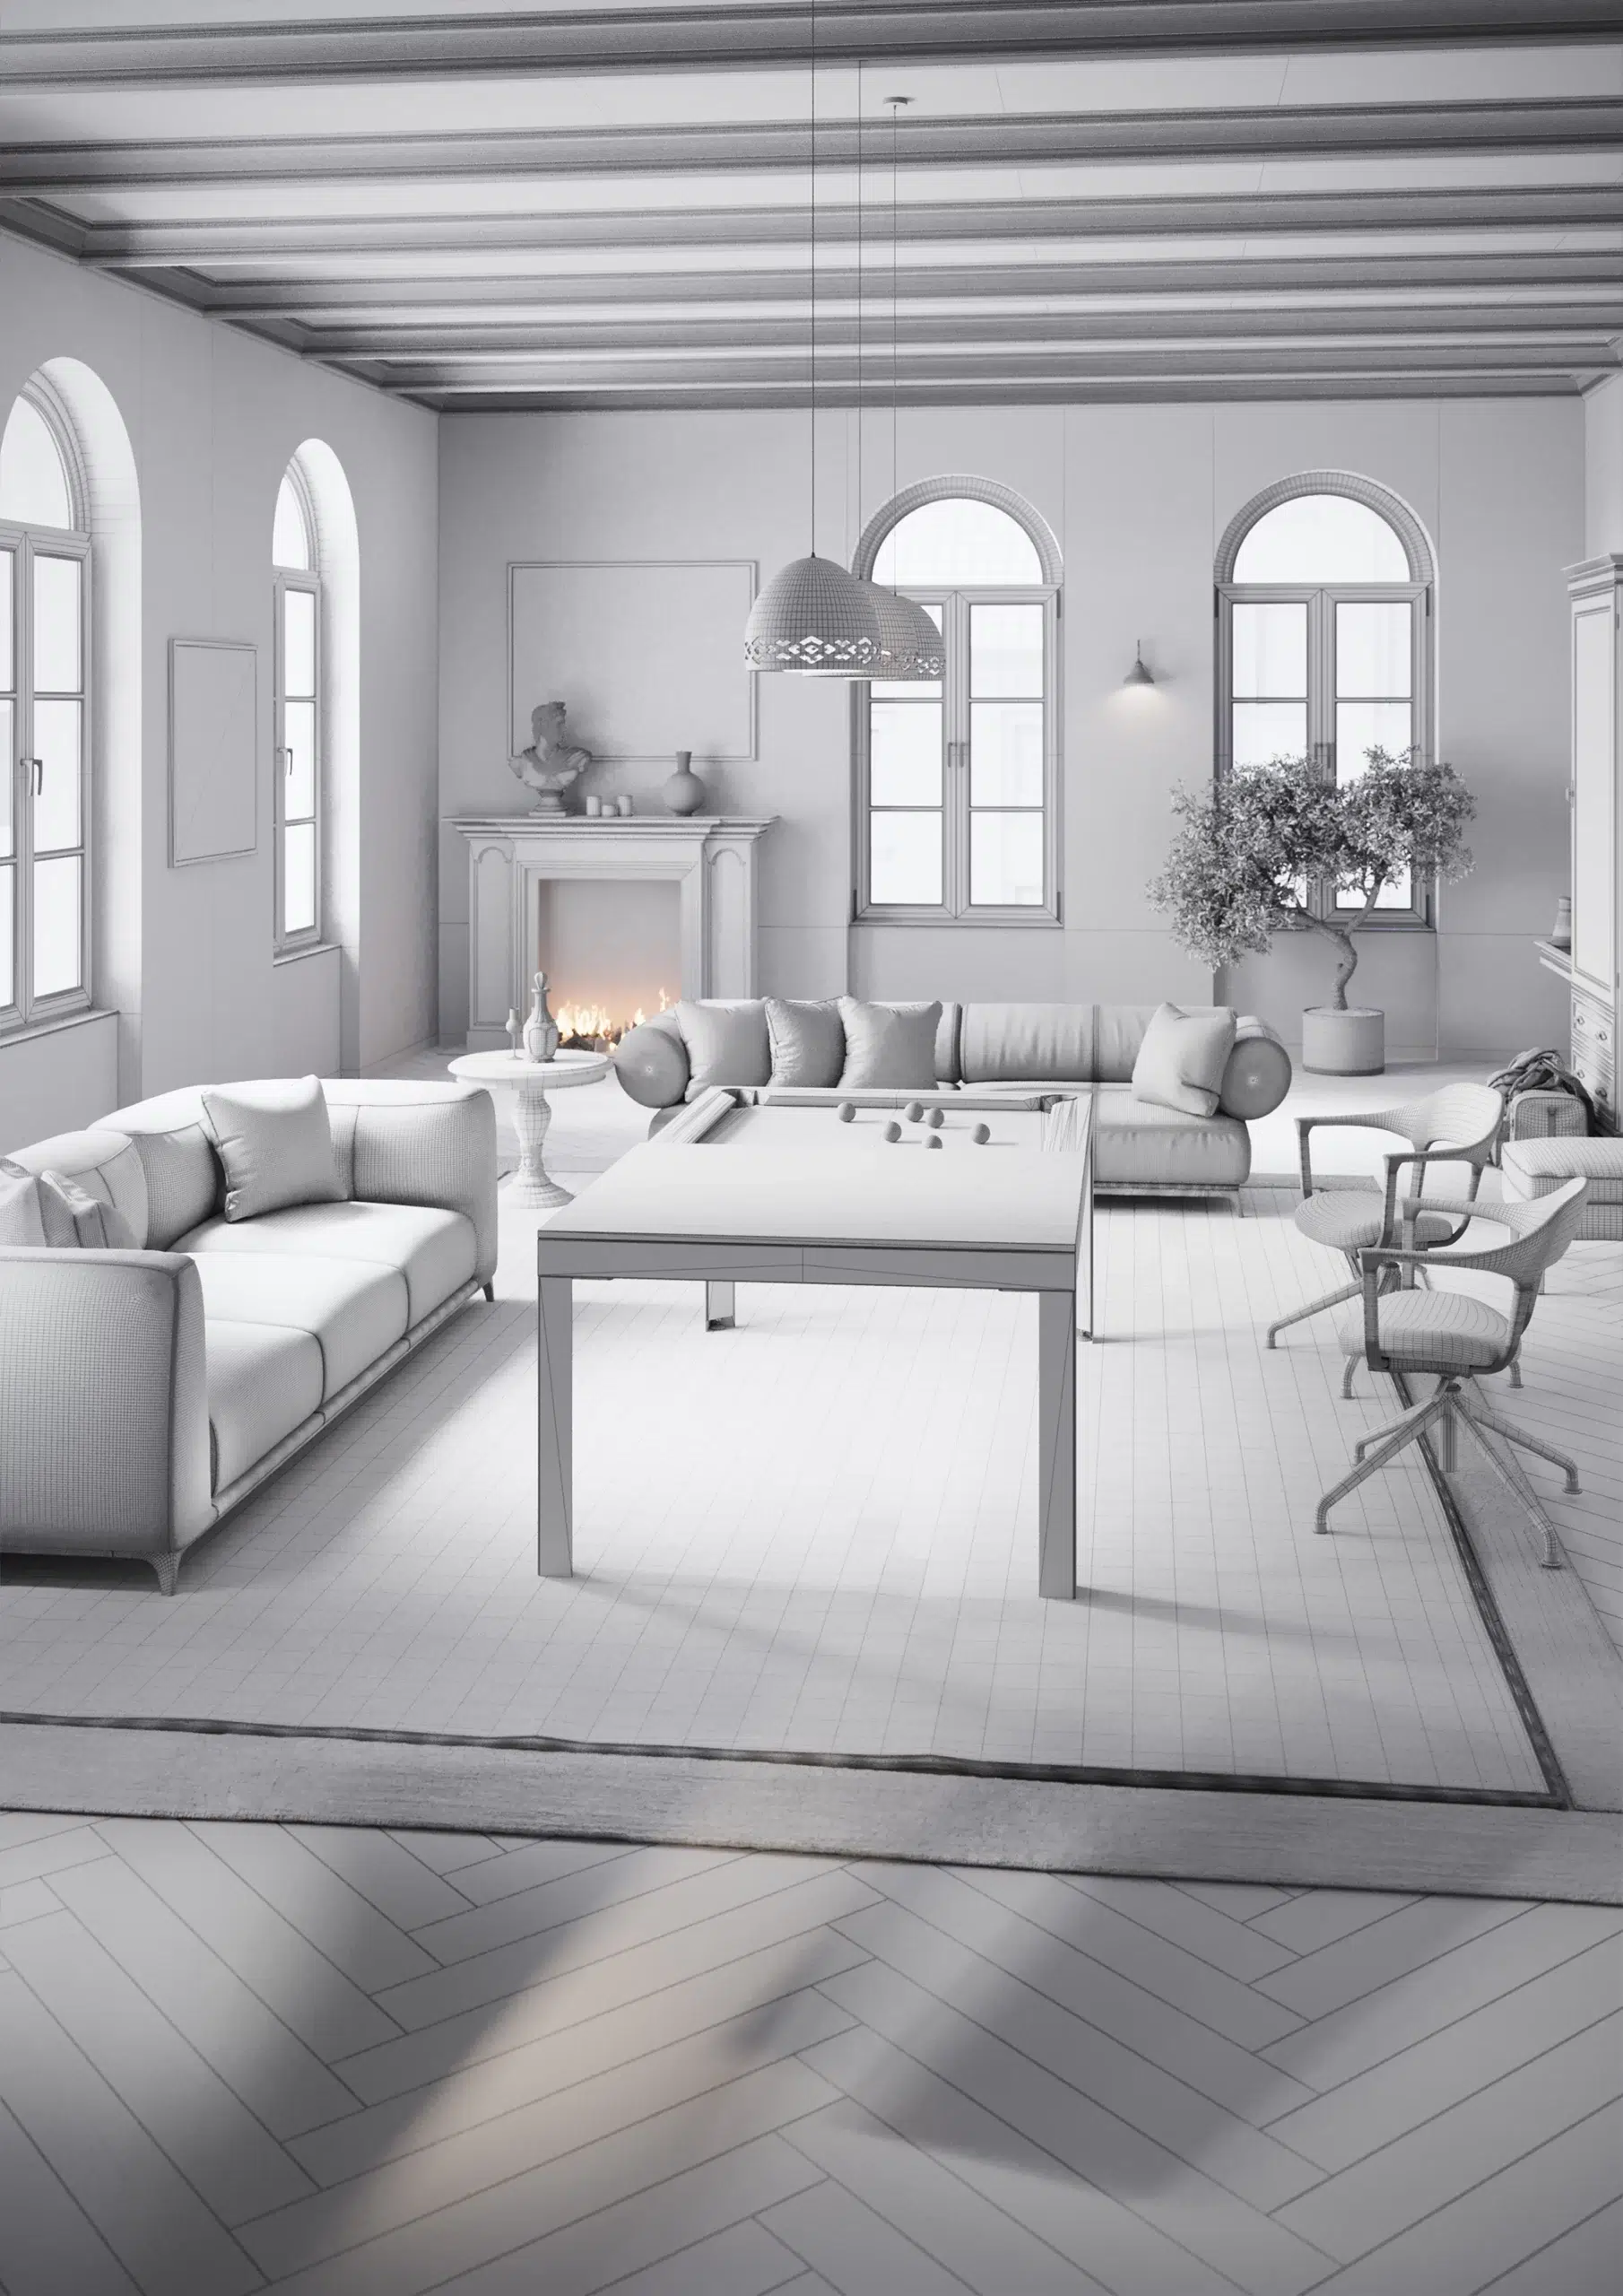 Wireframe render of a sophisticated living room with a pool table centerpiece, designed by CGVIZ Studio